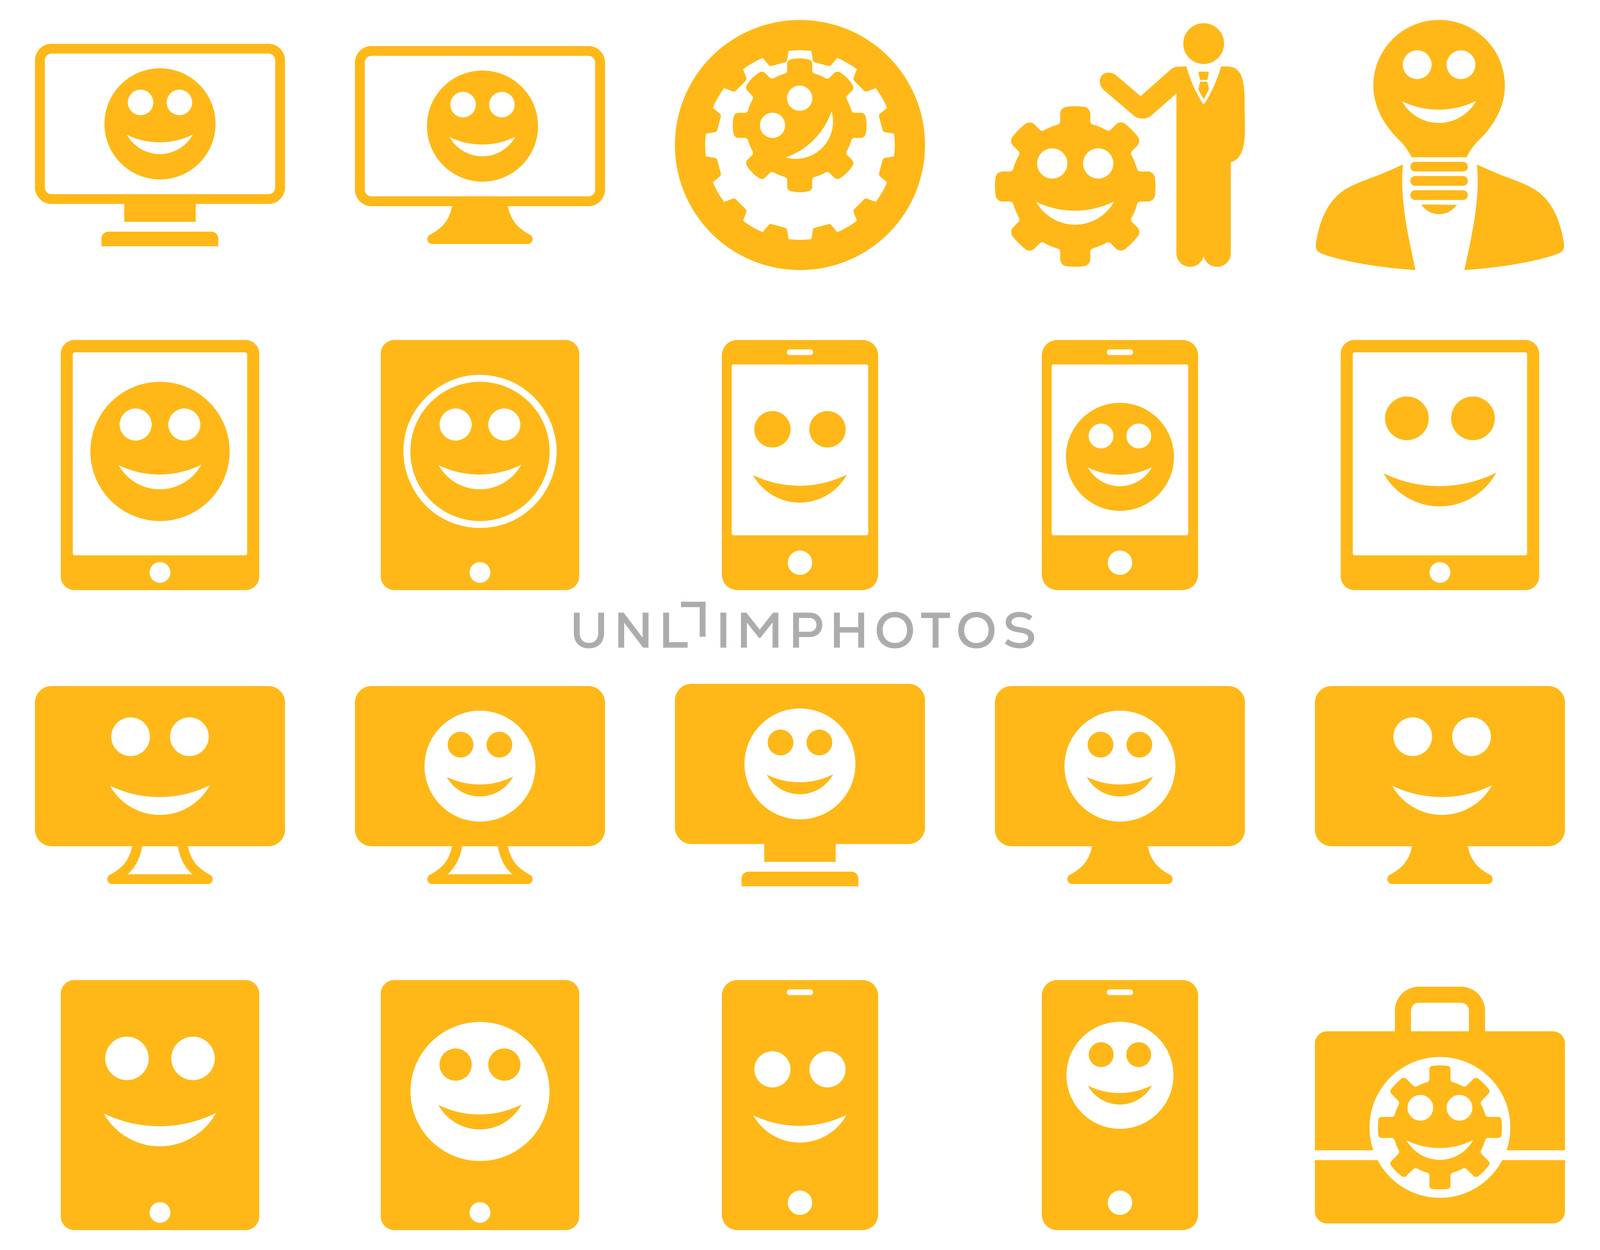 Tools, options, smiles, displays, devices icons. Glyph set style is flat images, yellow symbols, isolated on a white background.